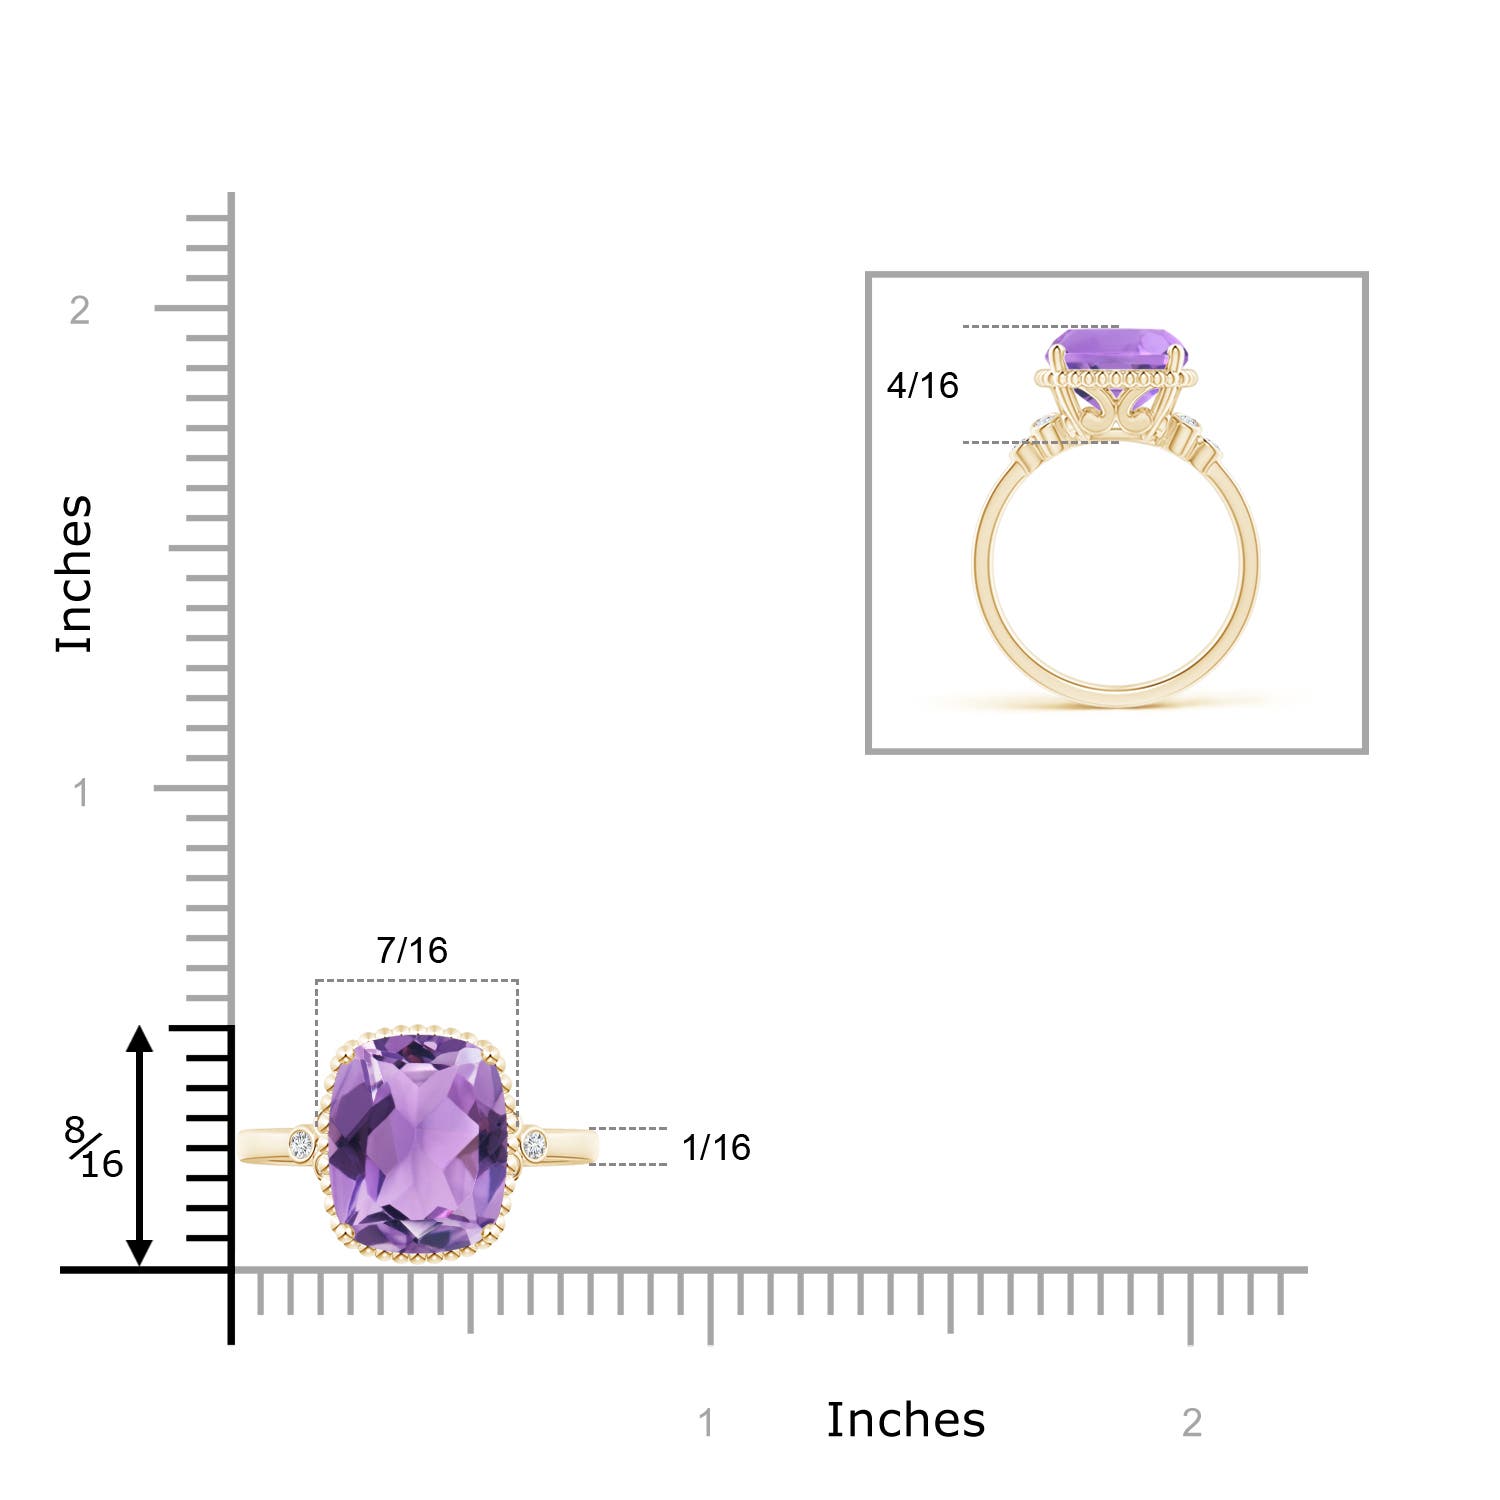 A - Amethyst / 3.58 CT / 14 KT Yellow Gold